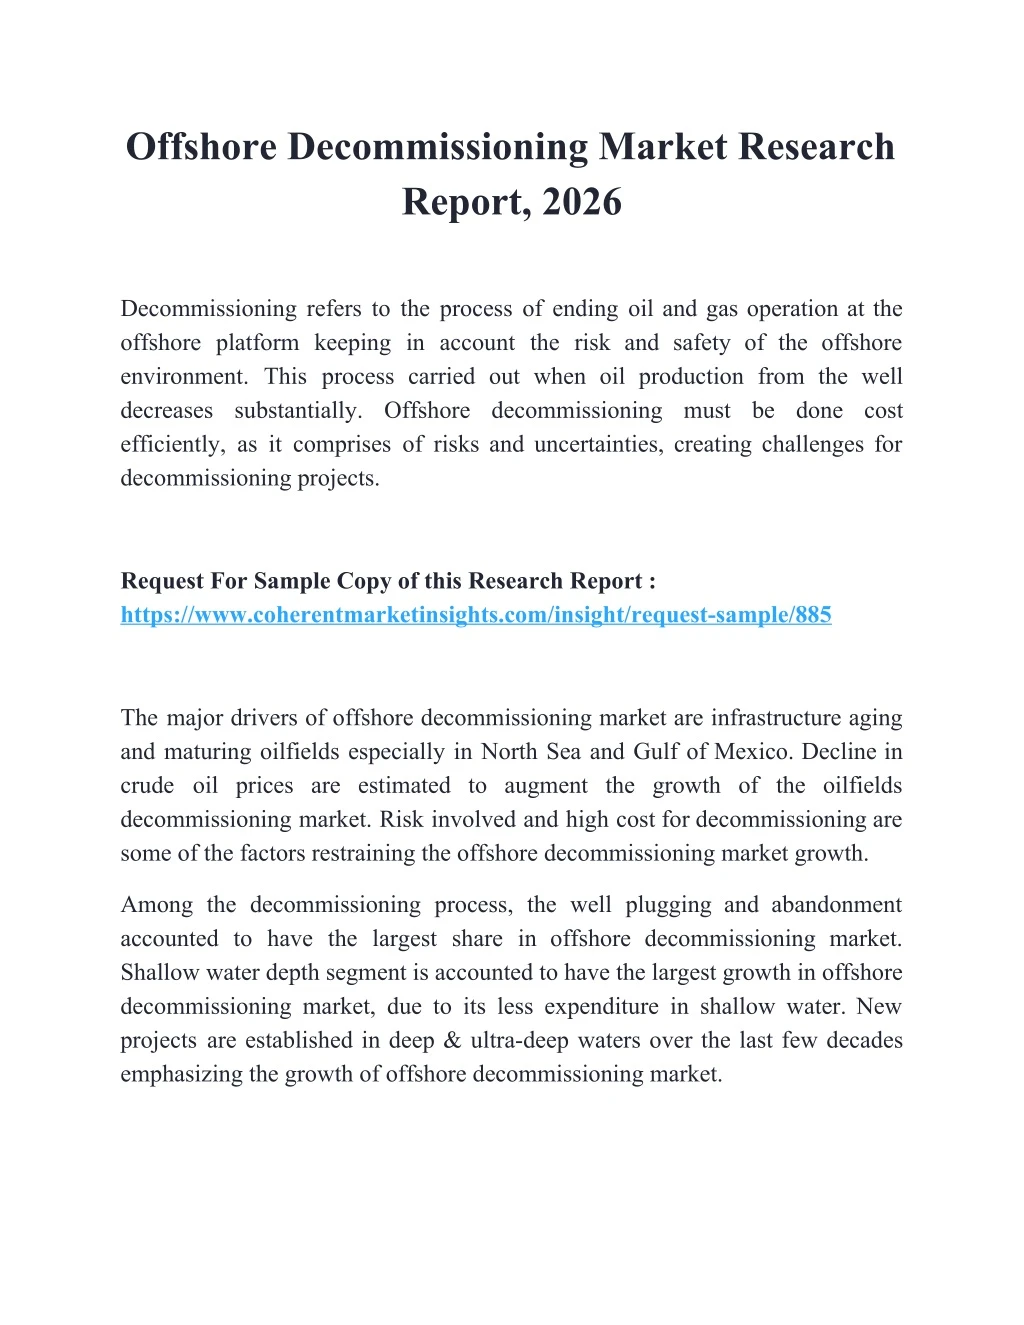 offshore decommissioning market research report